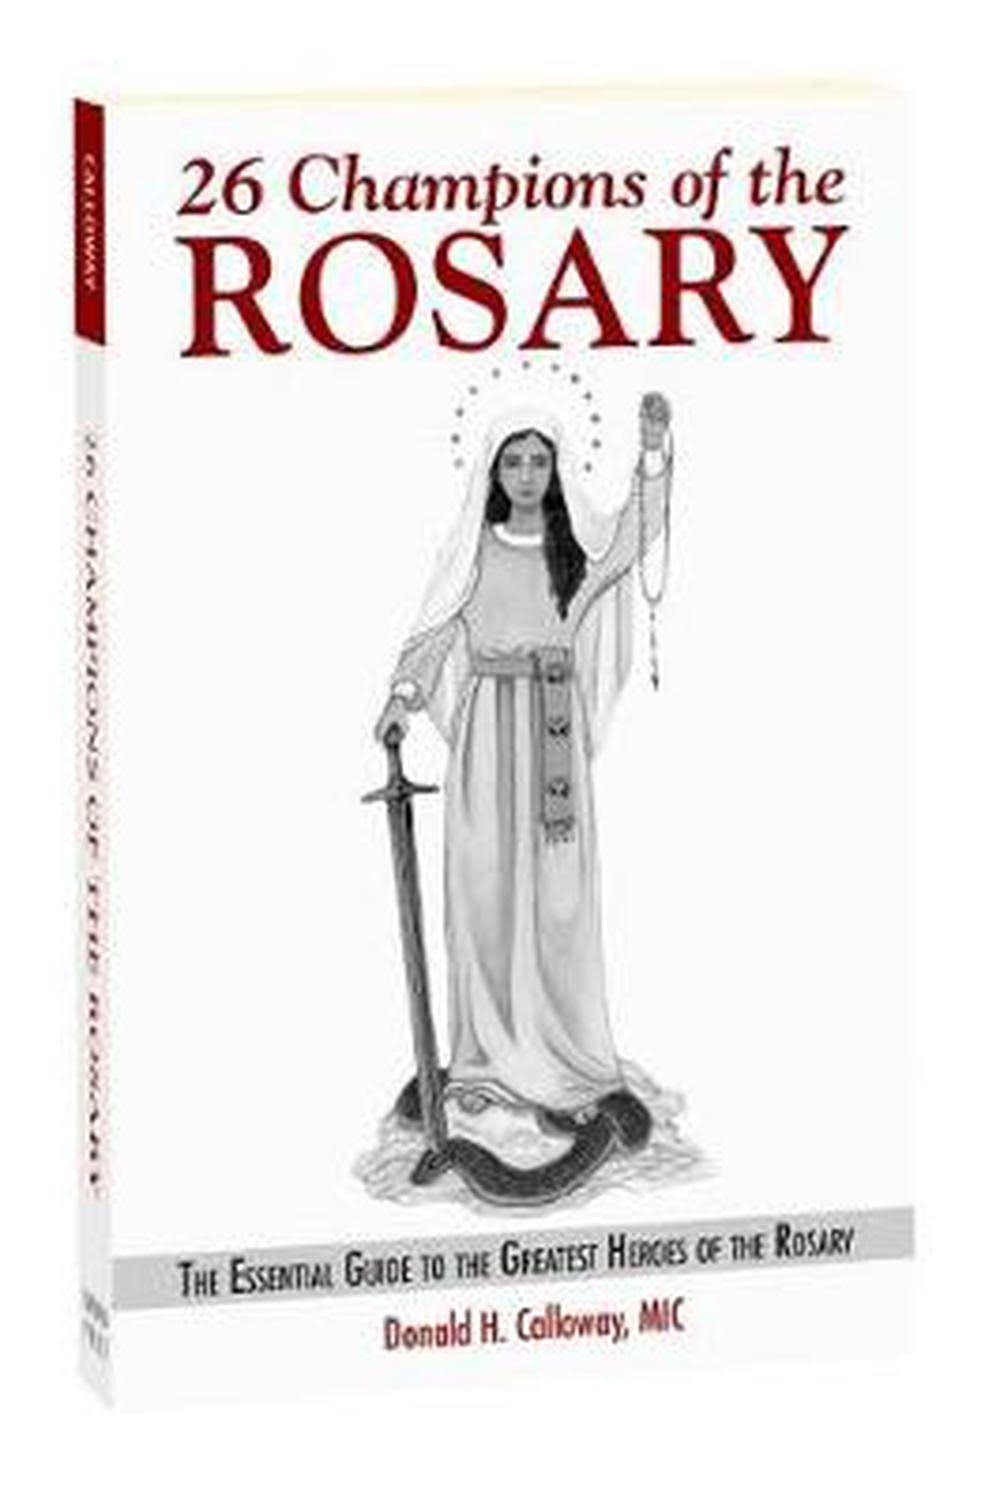 26 Champions of the Rosary: The Essential Guide to the Greatest Heroes of the Rosary - Donald H. Calloway